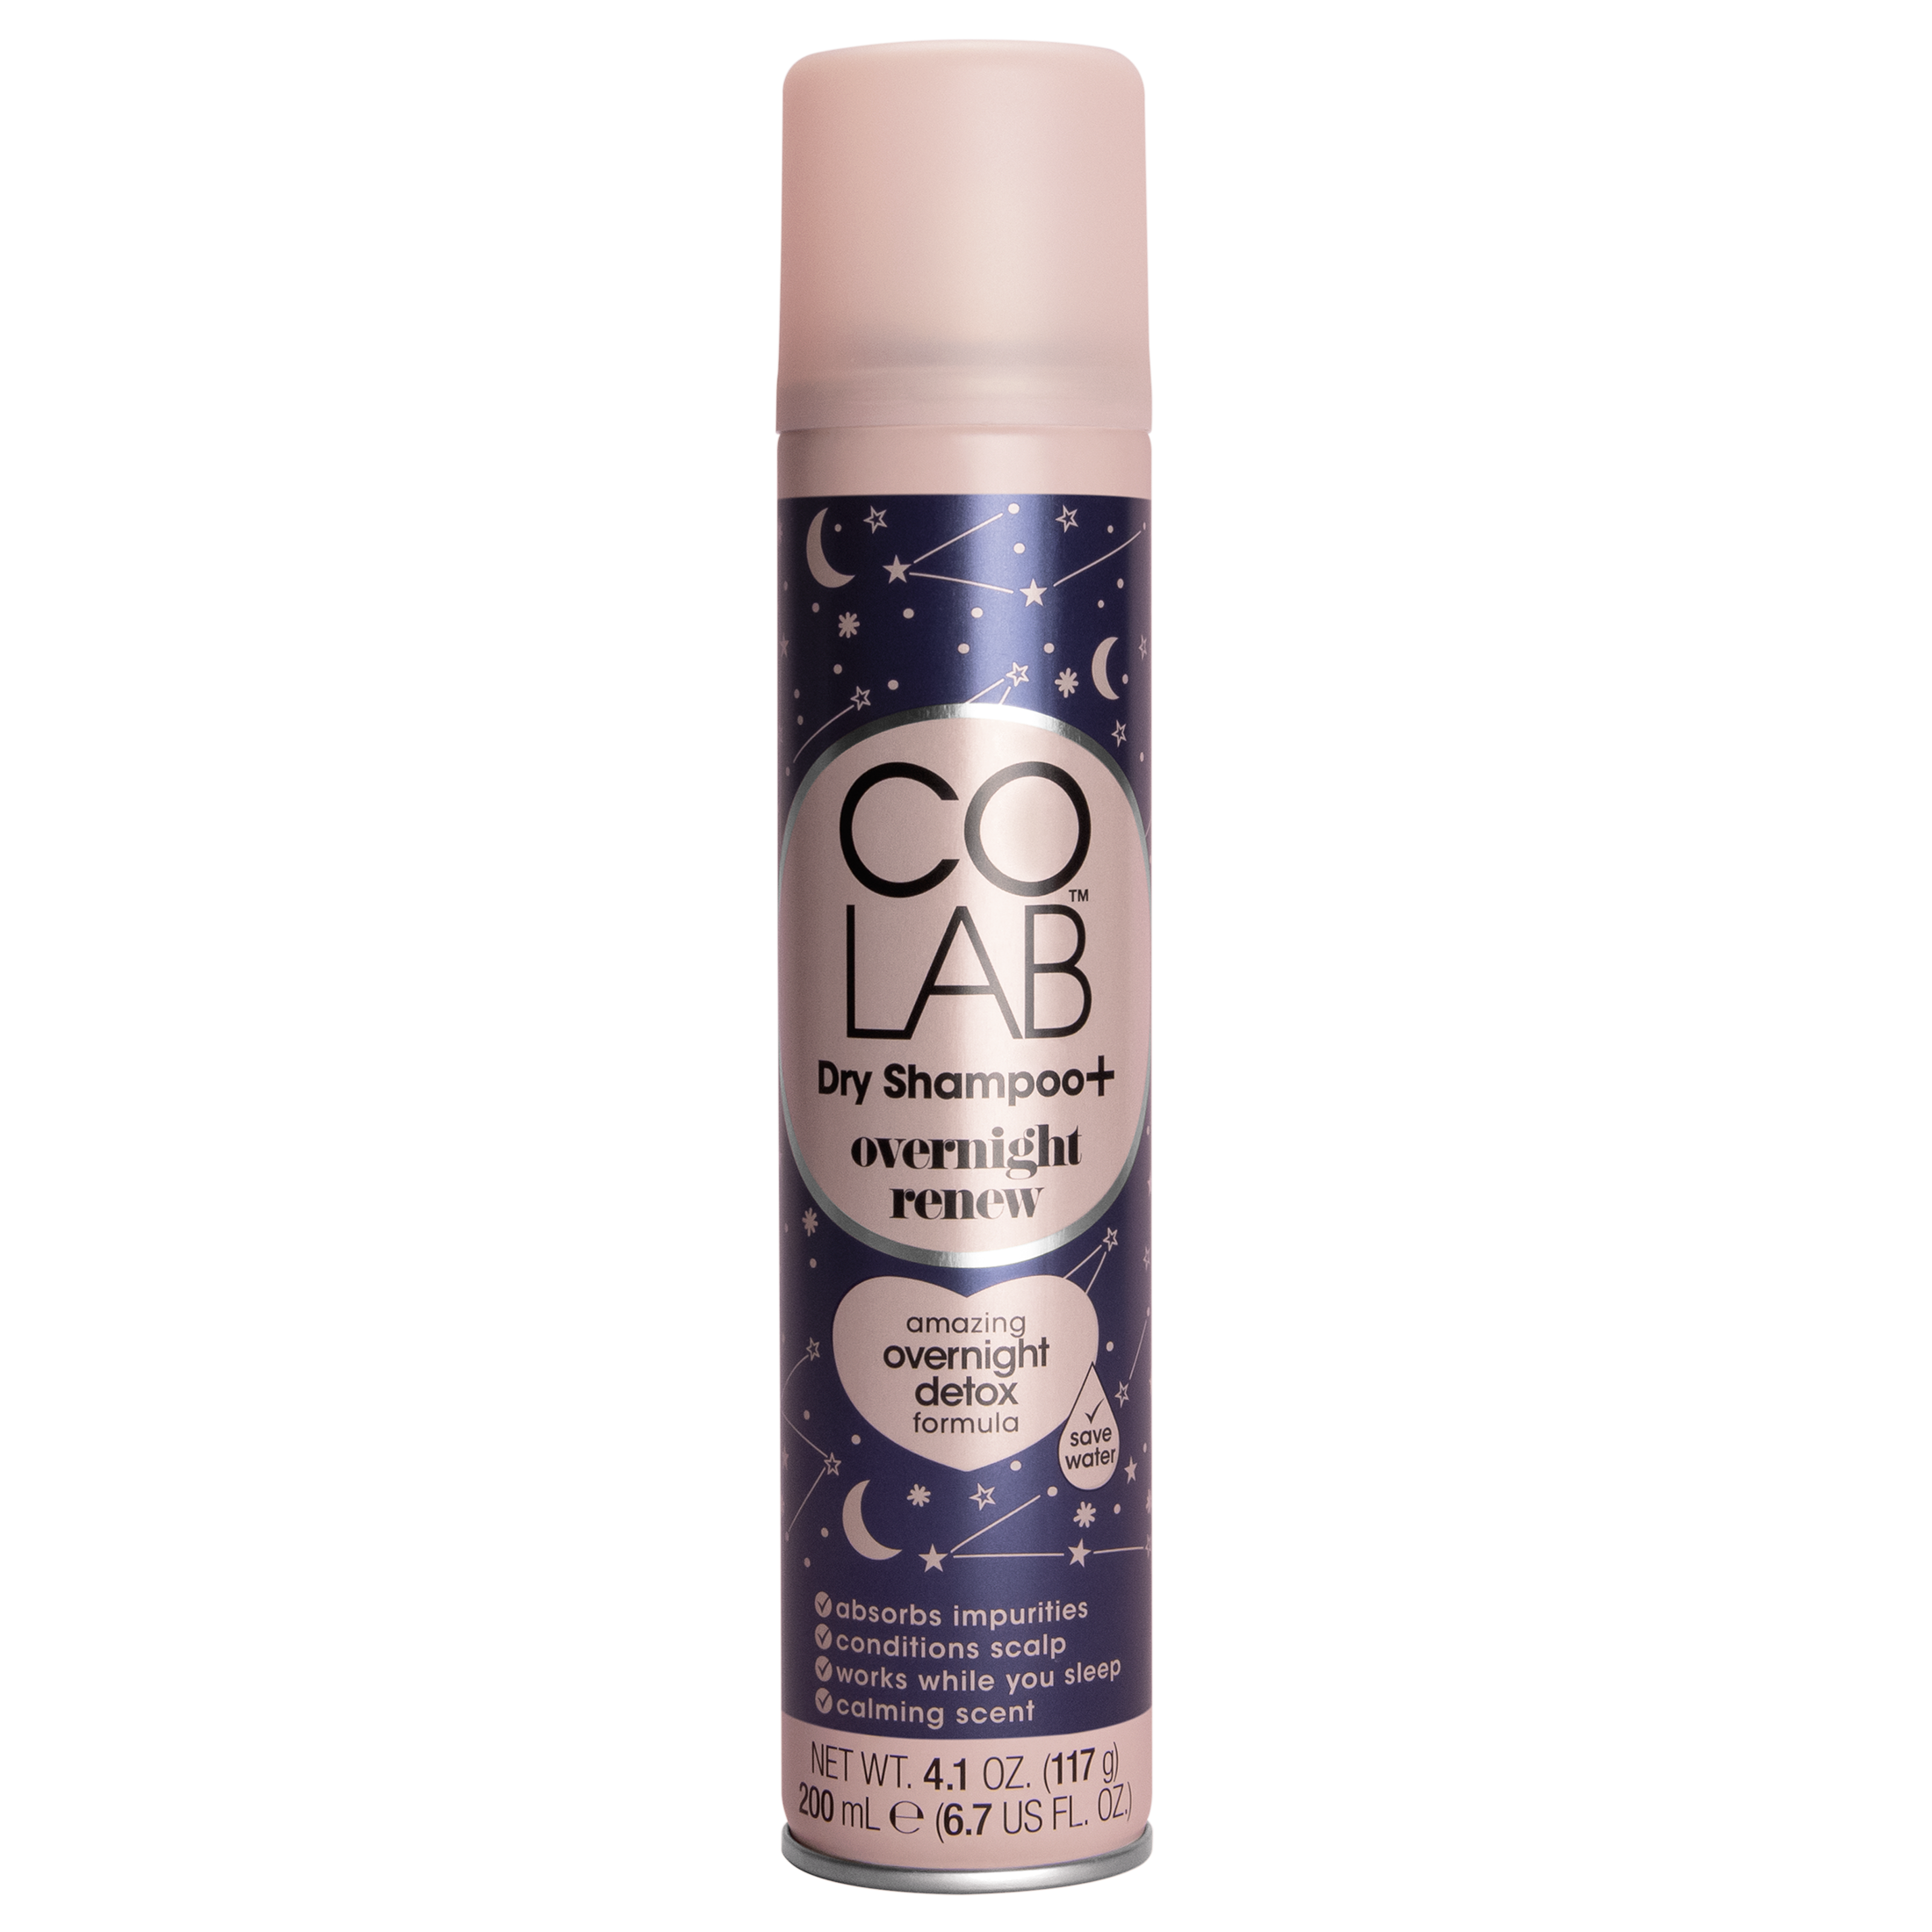 COLAB Dry + Shampoo Overnight Renew Oil Control with Lavender, 6.7 fl oz - image 1 of 6